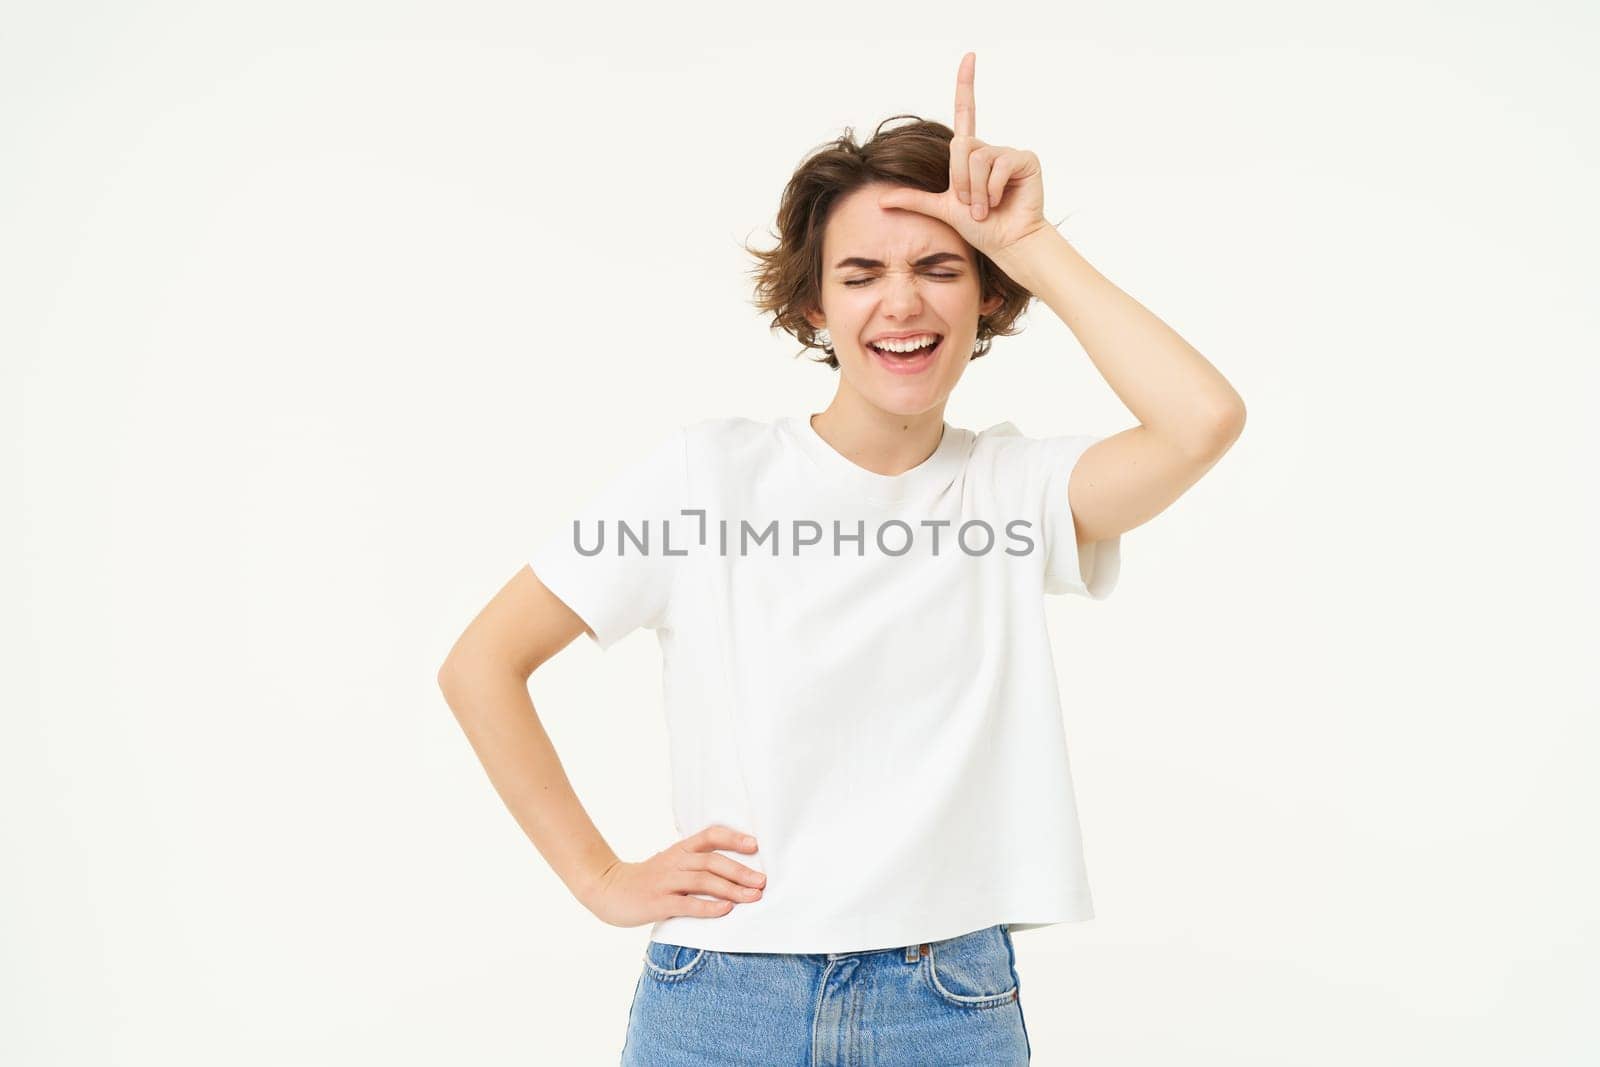 Portrait of happy young woman mocking, winning prize and making fun of loser, showing l letter on forehead, stands over white background.